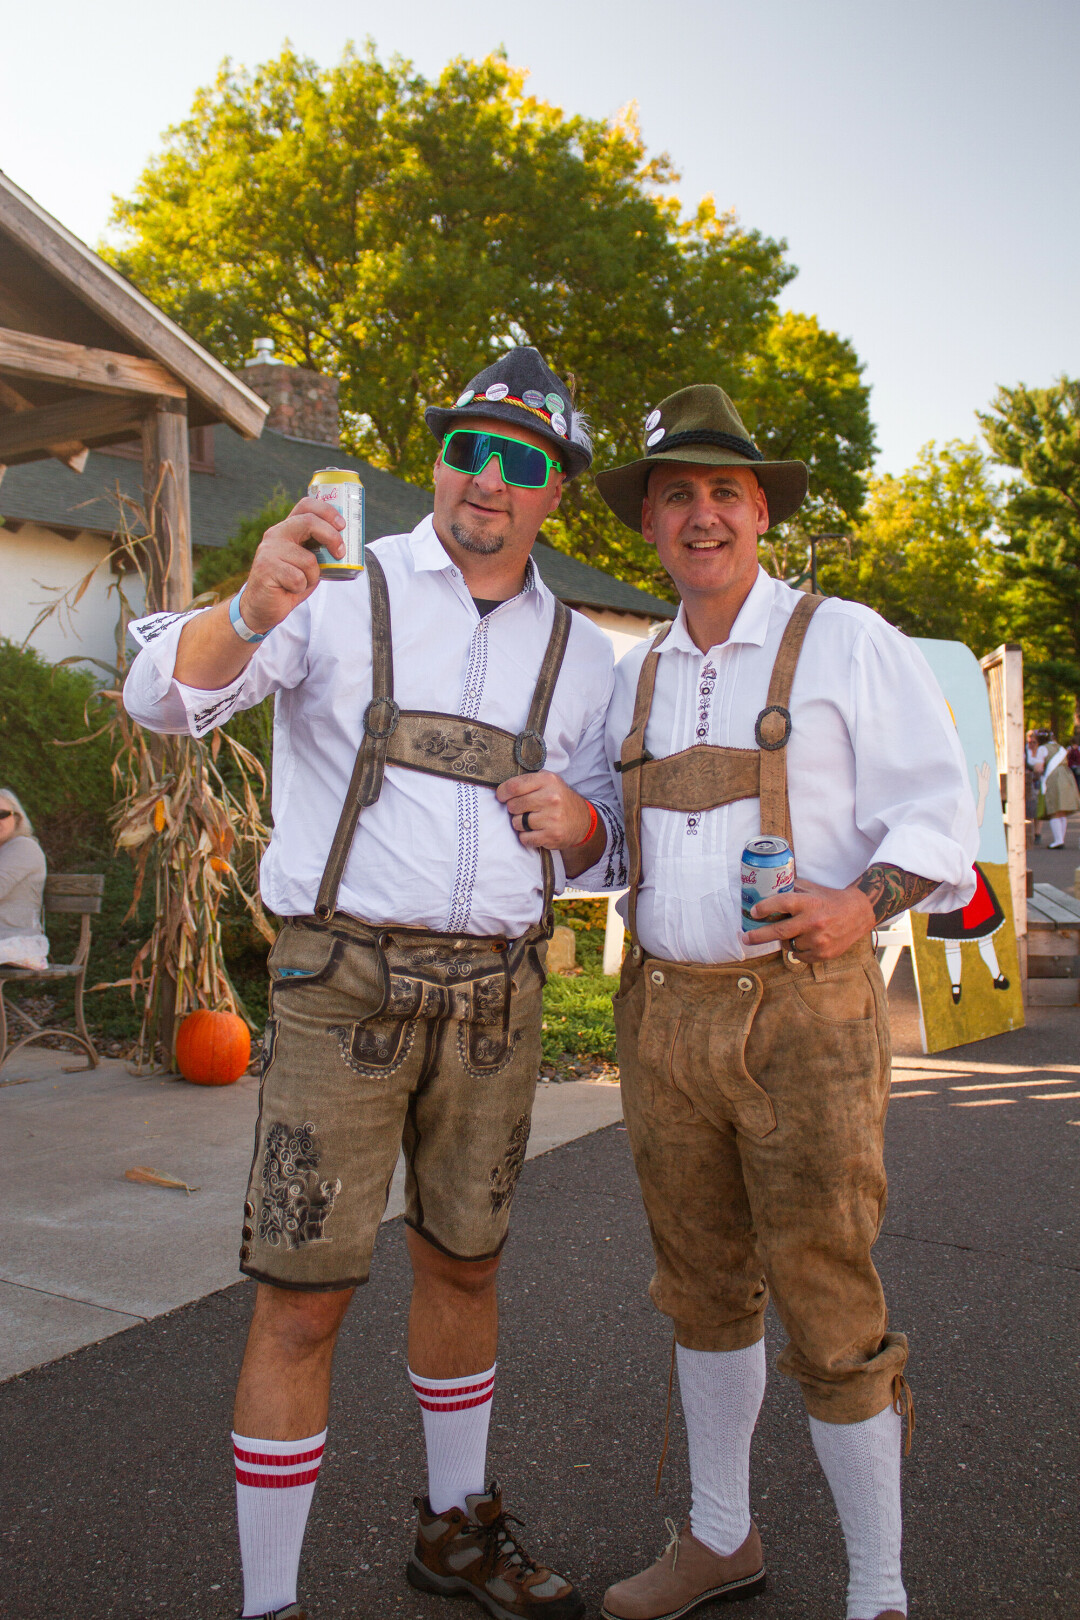 PROST! Annual Oktoberfest Logo Contest in the works.